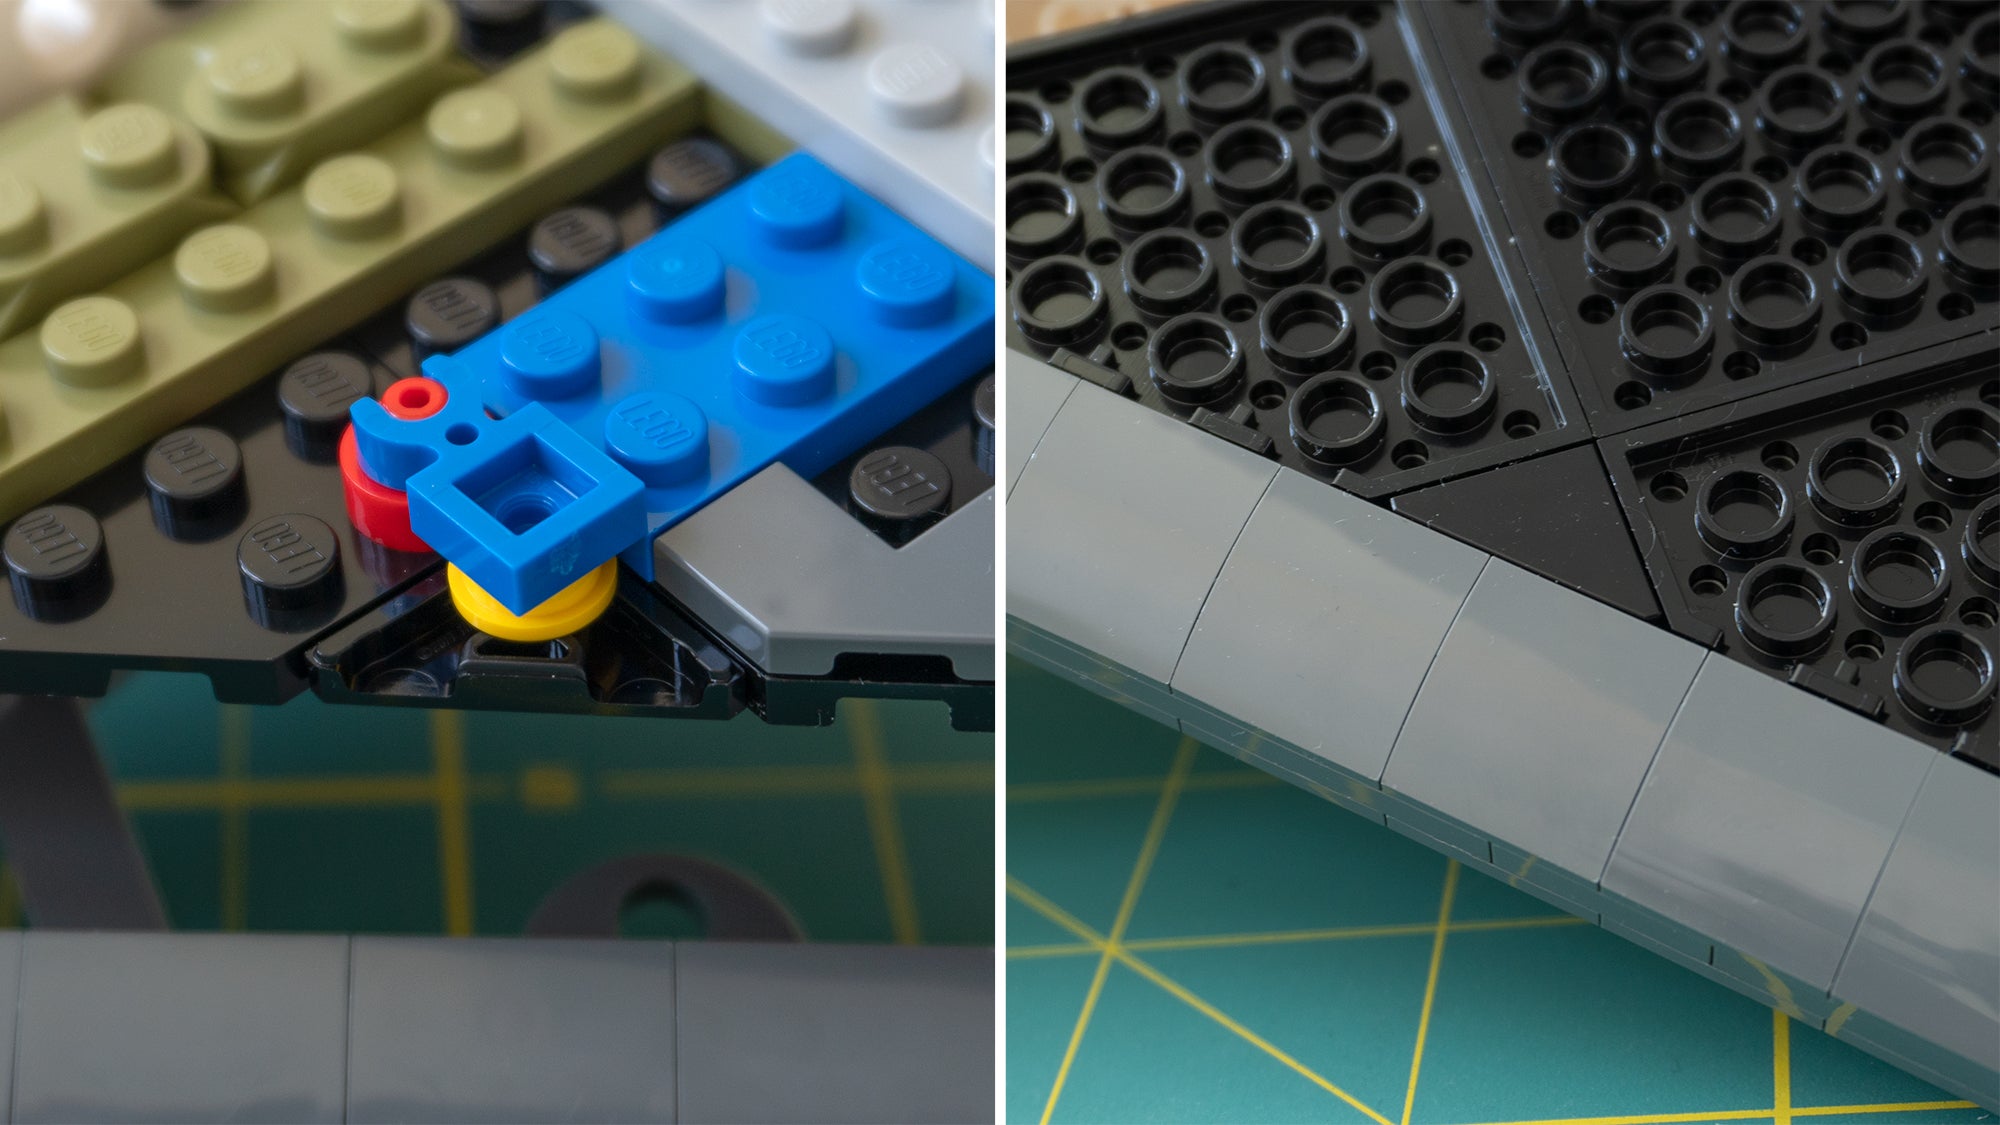 One of the smallest parts in the entire build that allowed a triangular plate to be suspended in place upside-down impressed me the most and reminded me why I'll probably never be a professional Lego builder. (Photo: Andrew Liszewski/Gizmodo)